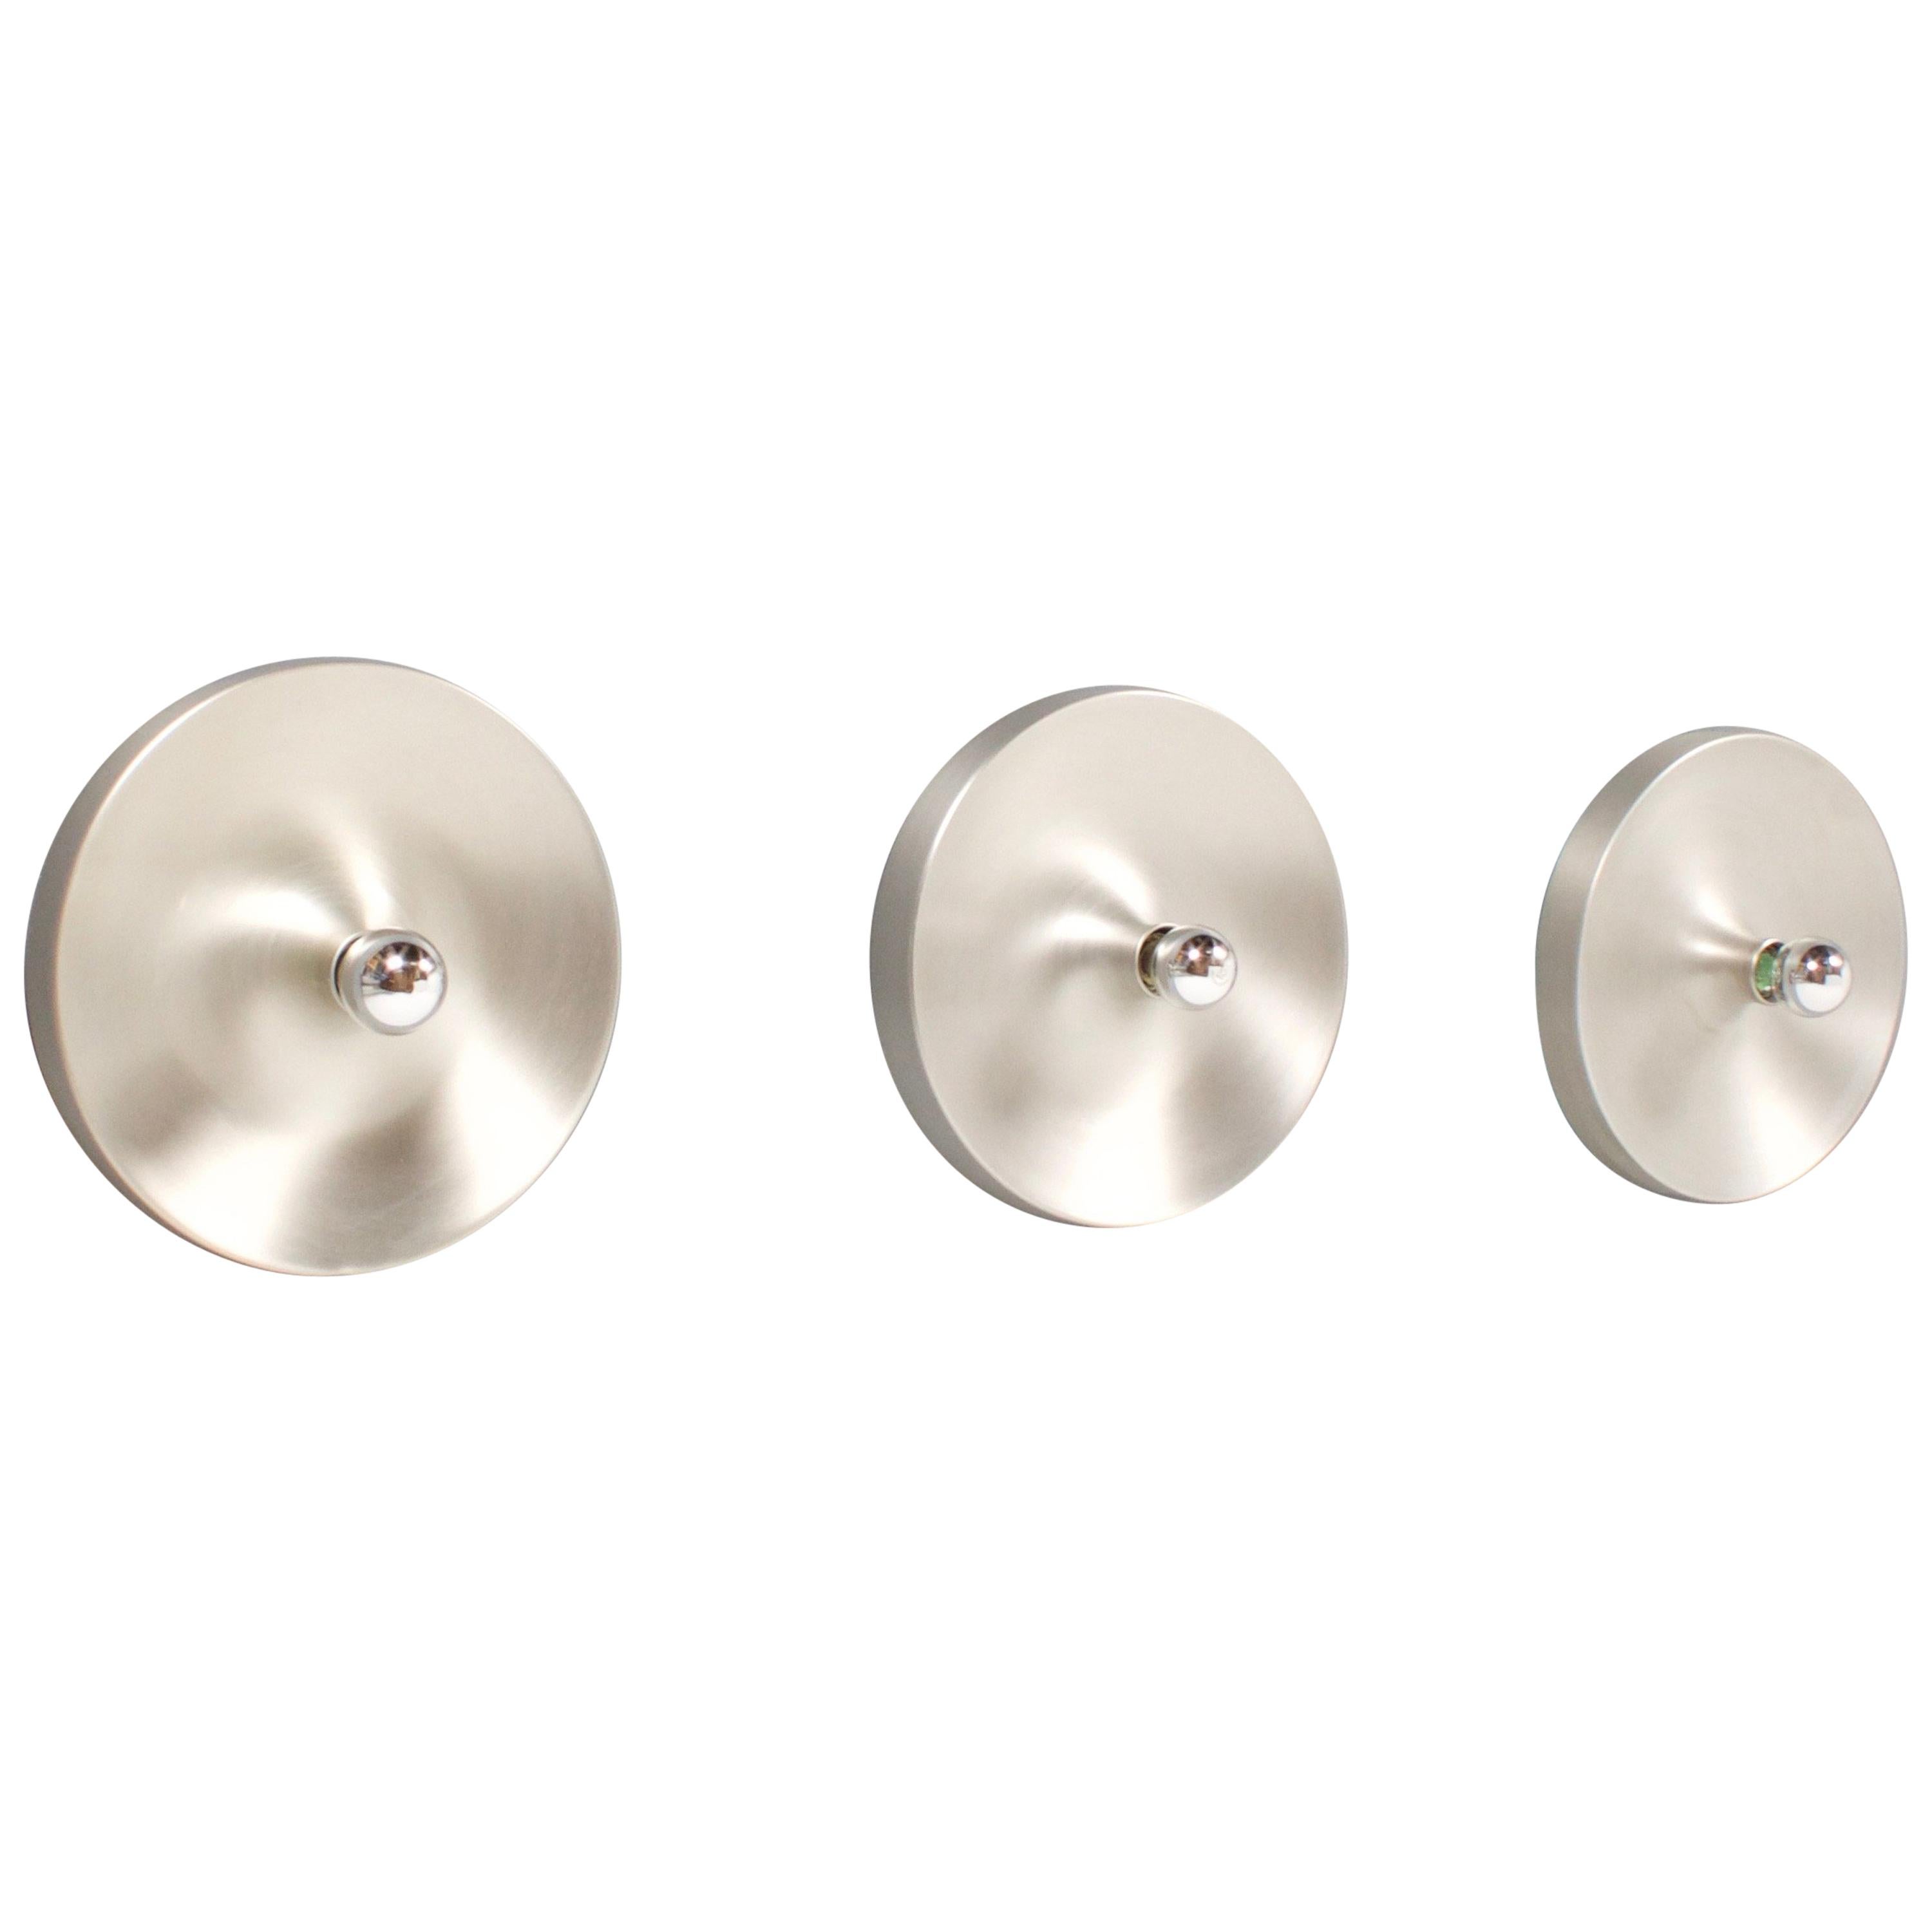 1/3 Modernist Aluminum Disc Wall Lights or Flush Mounts by Cosack, 1970s